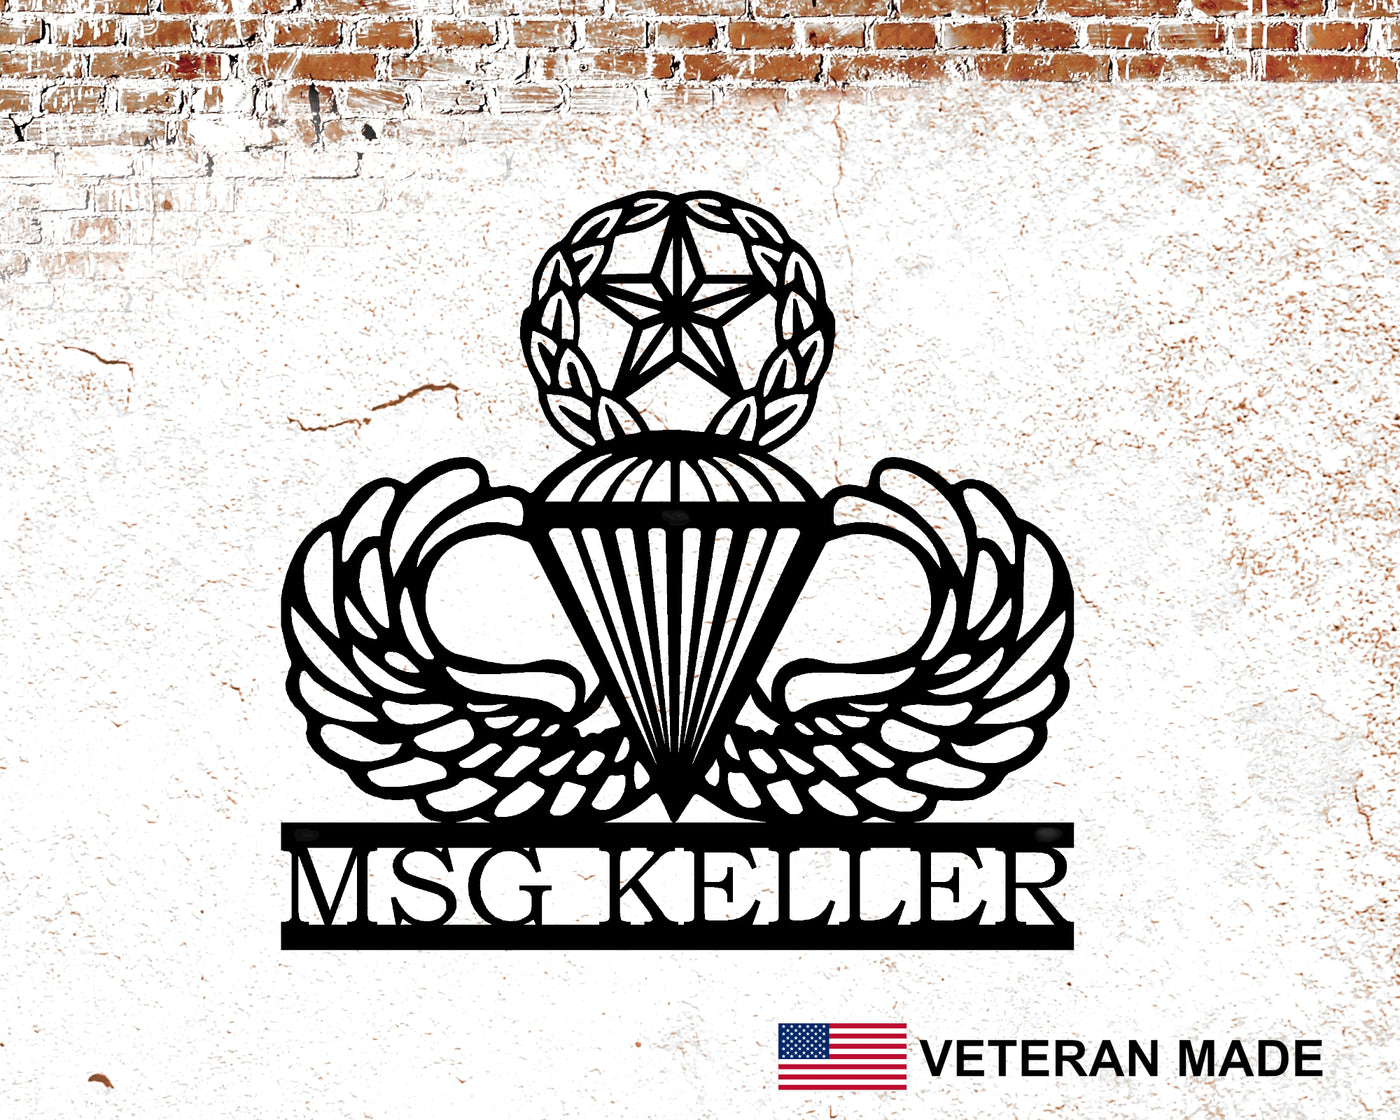 Personalized Airborne Master Parachutist Wings Metal Sign with Rank and Name - Madison Iron and Wood - Personalized sign - metal outdoor decor - Steel deocrations - american made products - veteran owned business products - fencing decorations - fencing supplies - custom wall decorations - personalized wall signs - steel - decorative post caps - steel post caps - metal post caps - brackets - structural brackets - home improvement - easter - easter decorations - easter gift - easter yard decor